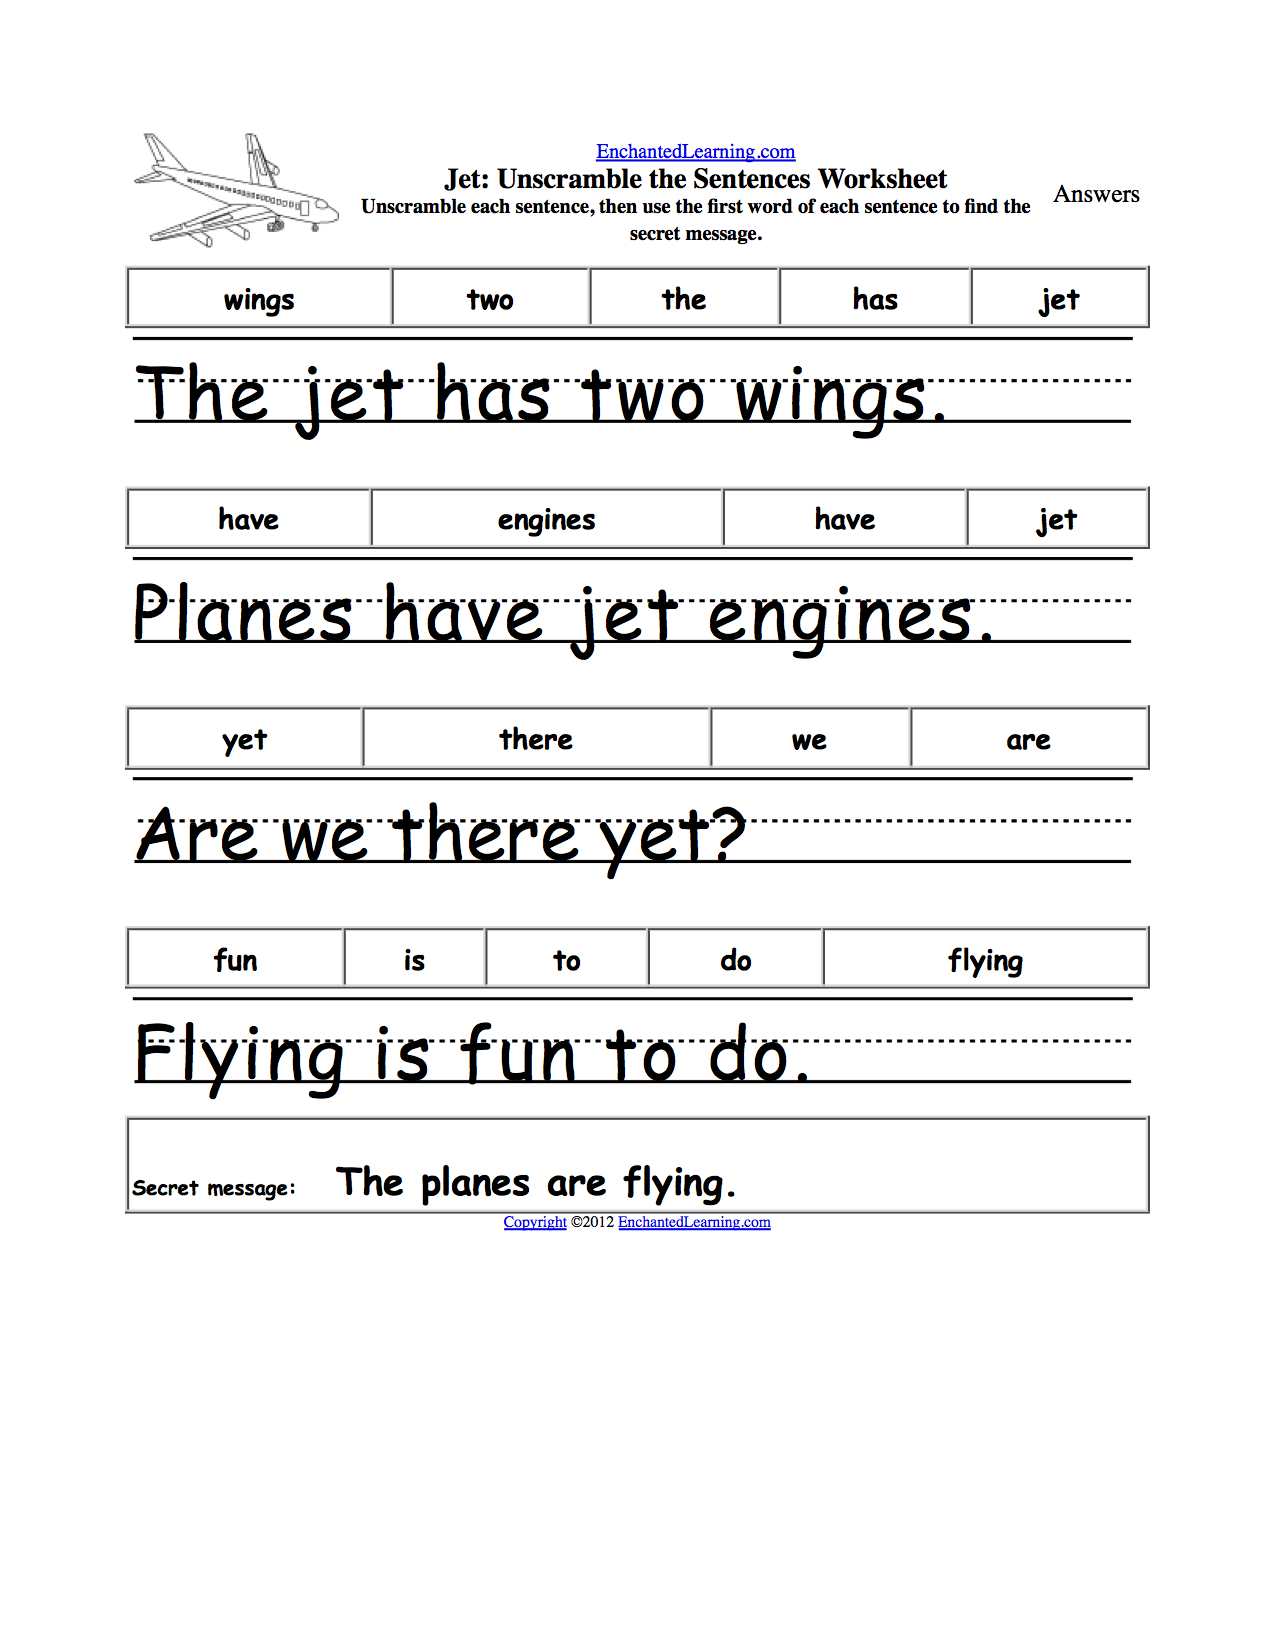 Unscramble The Sentences Worksheets Enchantedlearning Com Create your own tracing worksheets with our interactive worksheet maker. unscramble the sentences worksheets